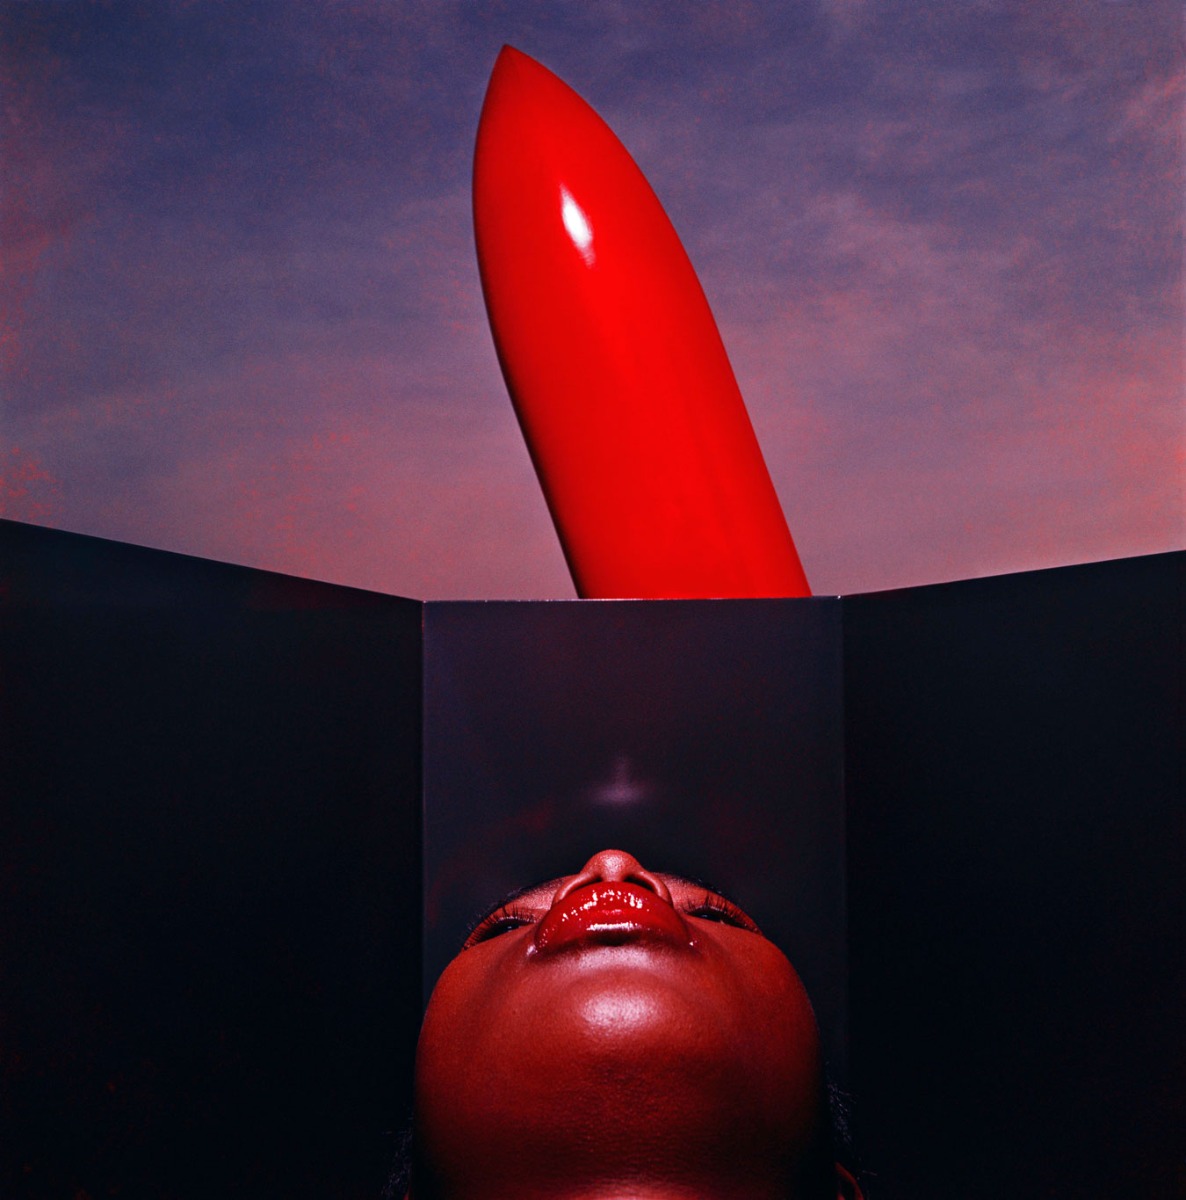 womans-upturned-face-looks-toward-giant-phallic-red-lipstick-in-background-against-purple-sky